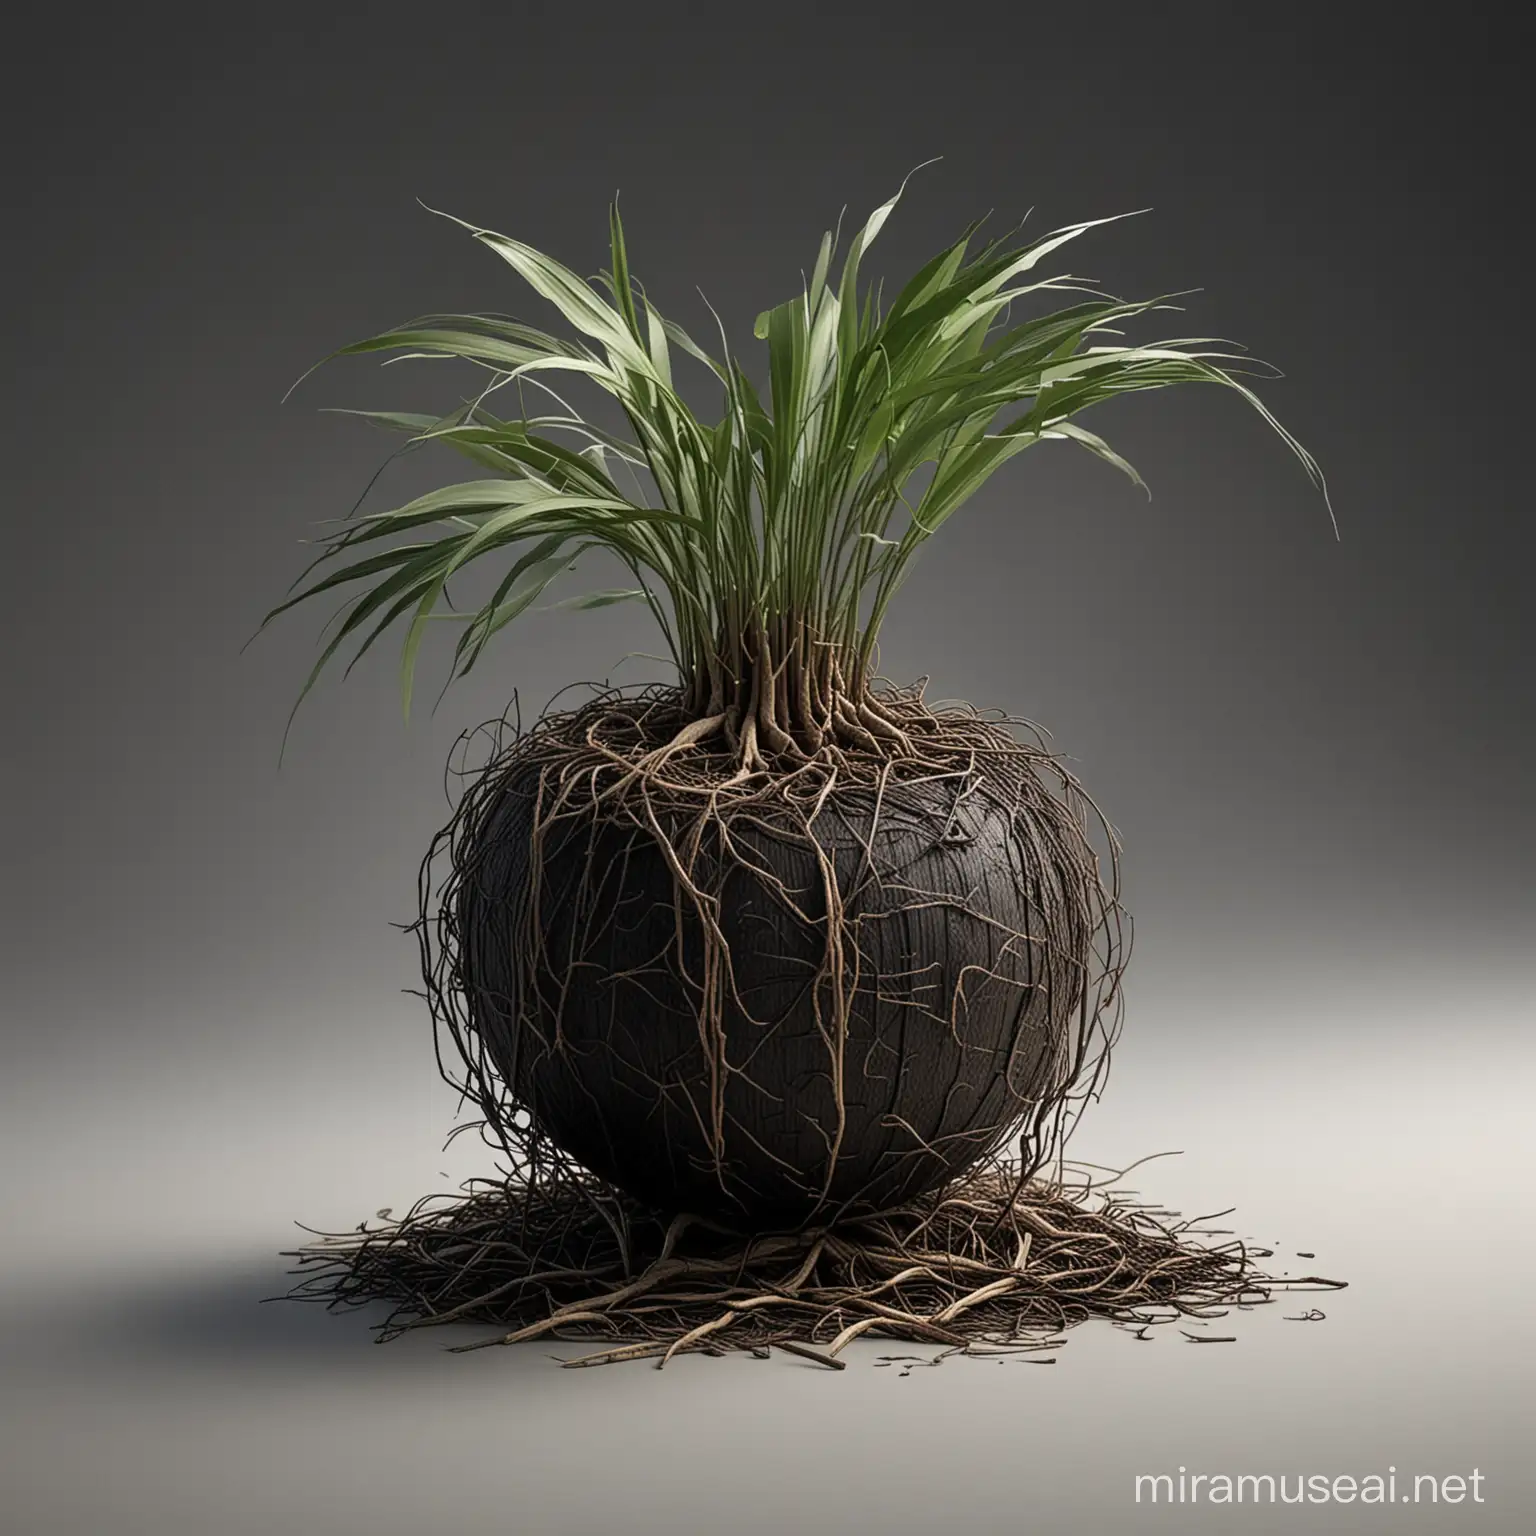 Realistic Black Vetiver Plant with Agarwood Pieces